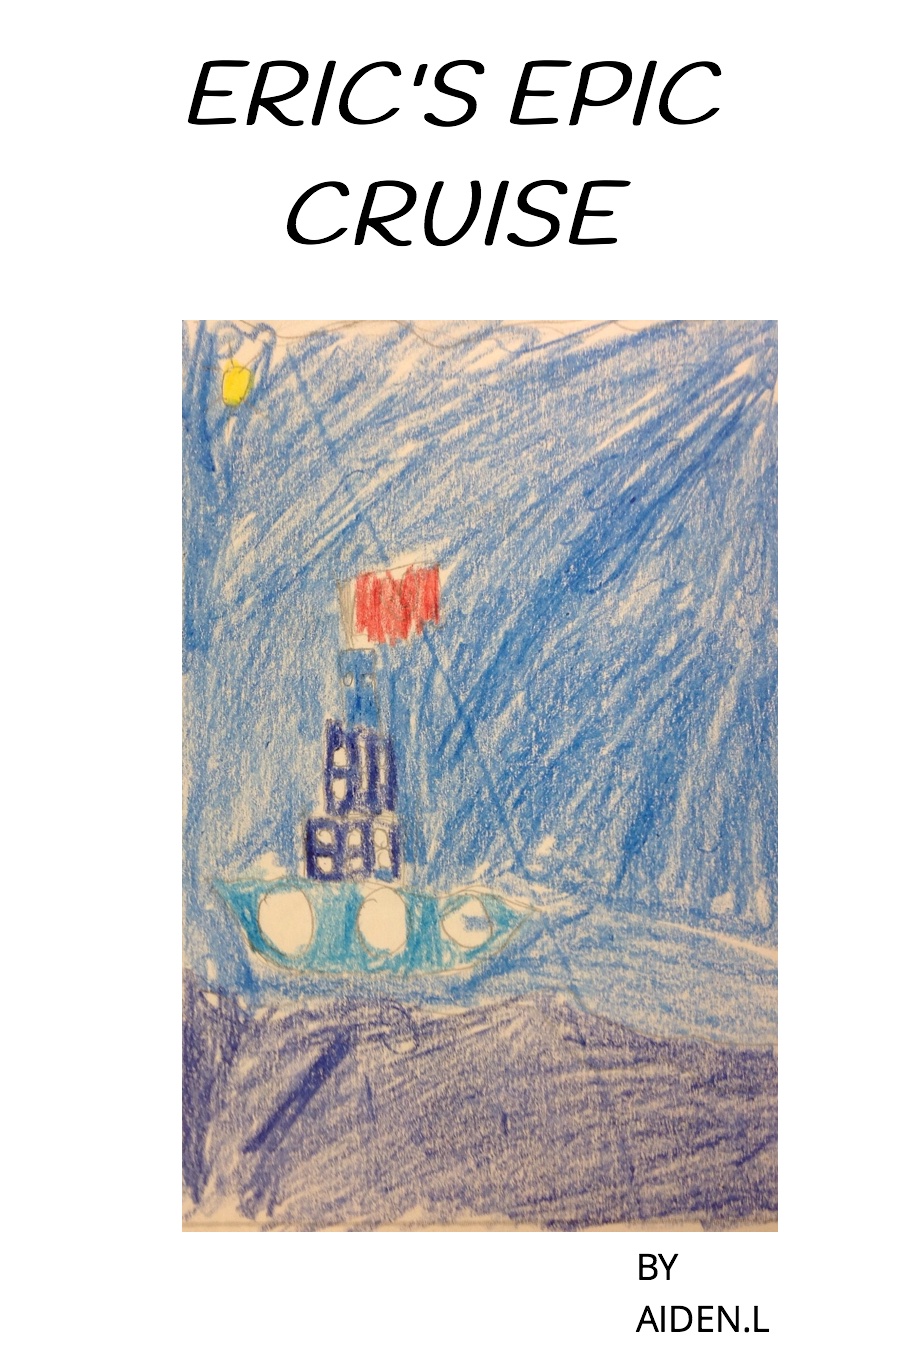 Eric’s Epic Cruise by Aiden L